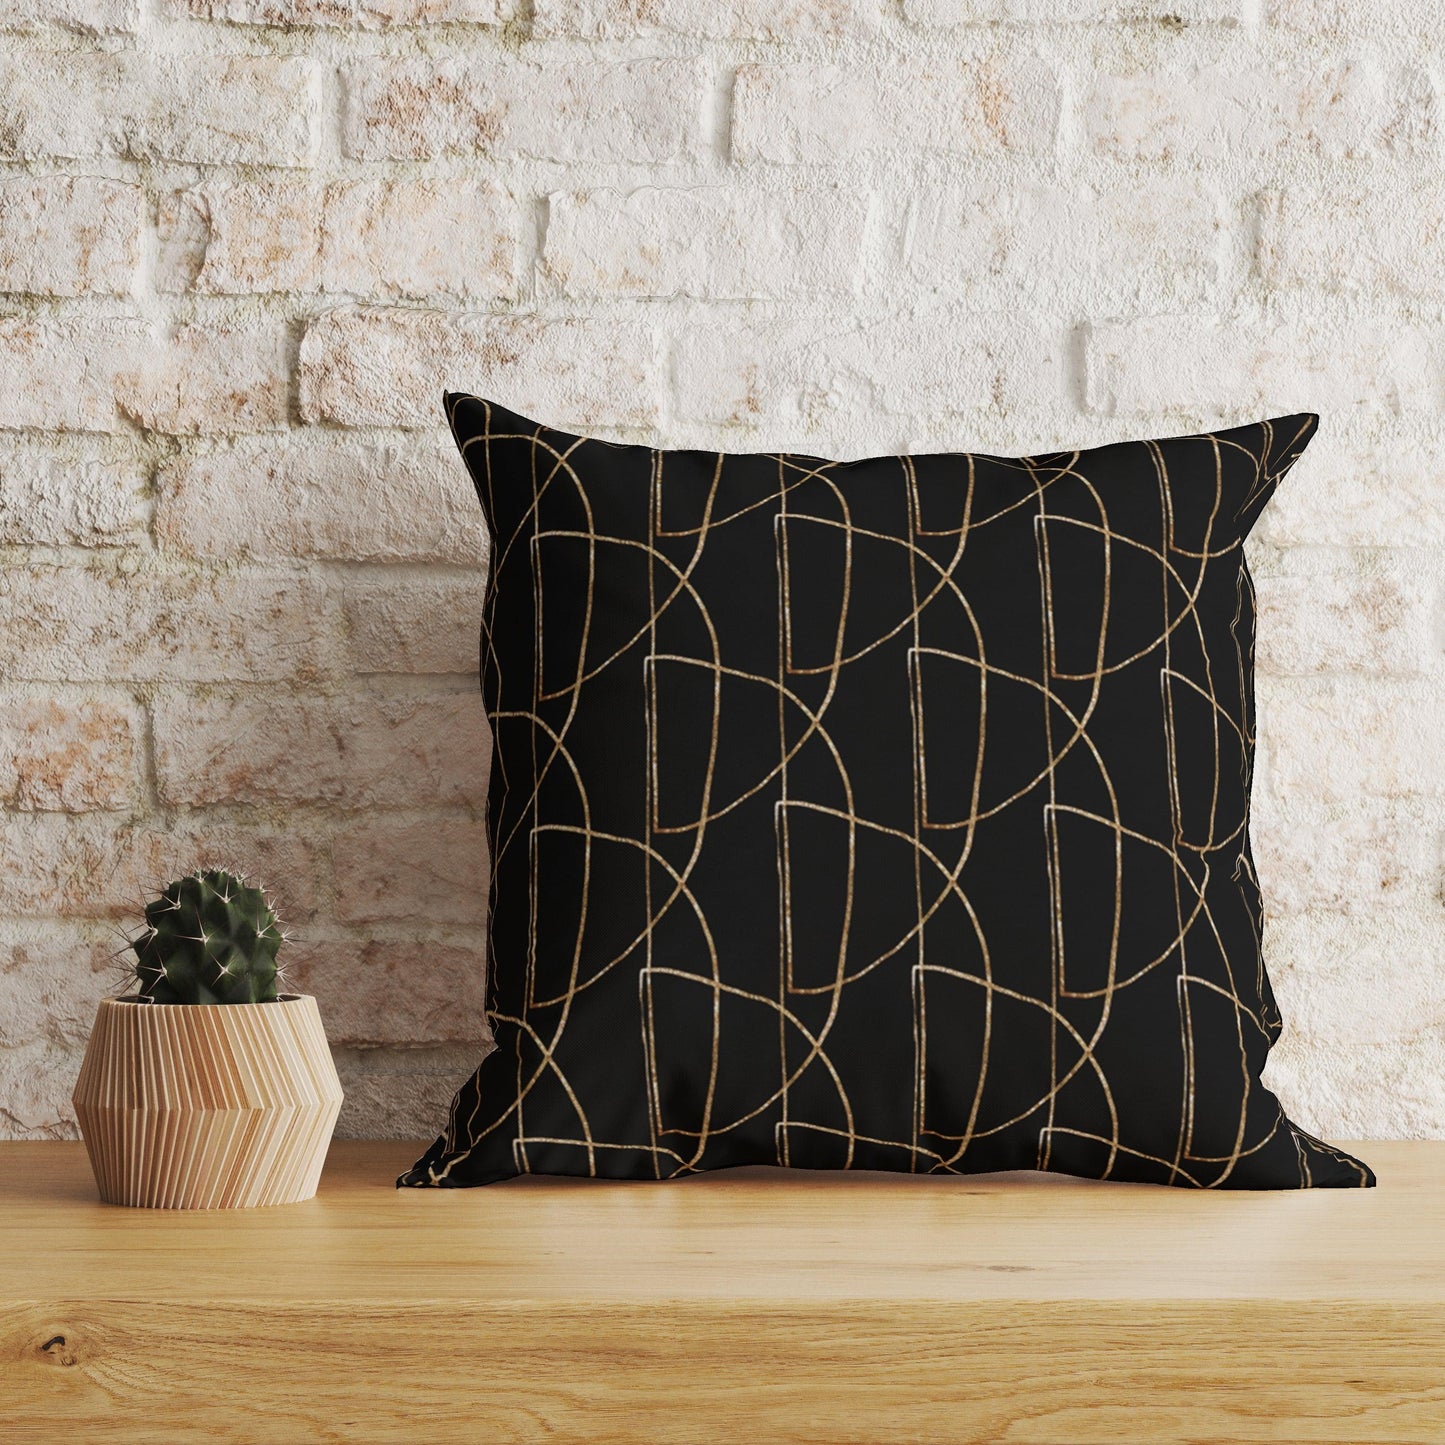 [] Black Gold Pattern Pillow Cushion & Cover │ Abstract Decorative Pillow │ Sofa Living Room Bedroom Decor - Besontique